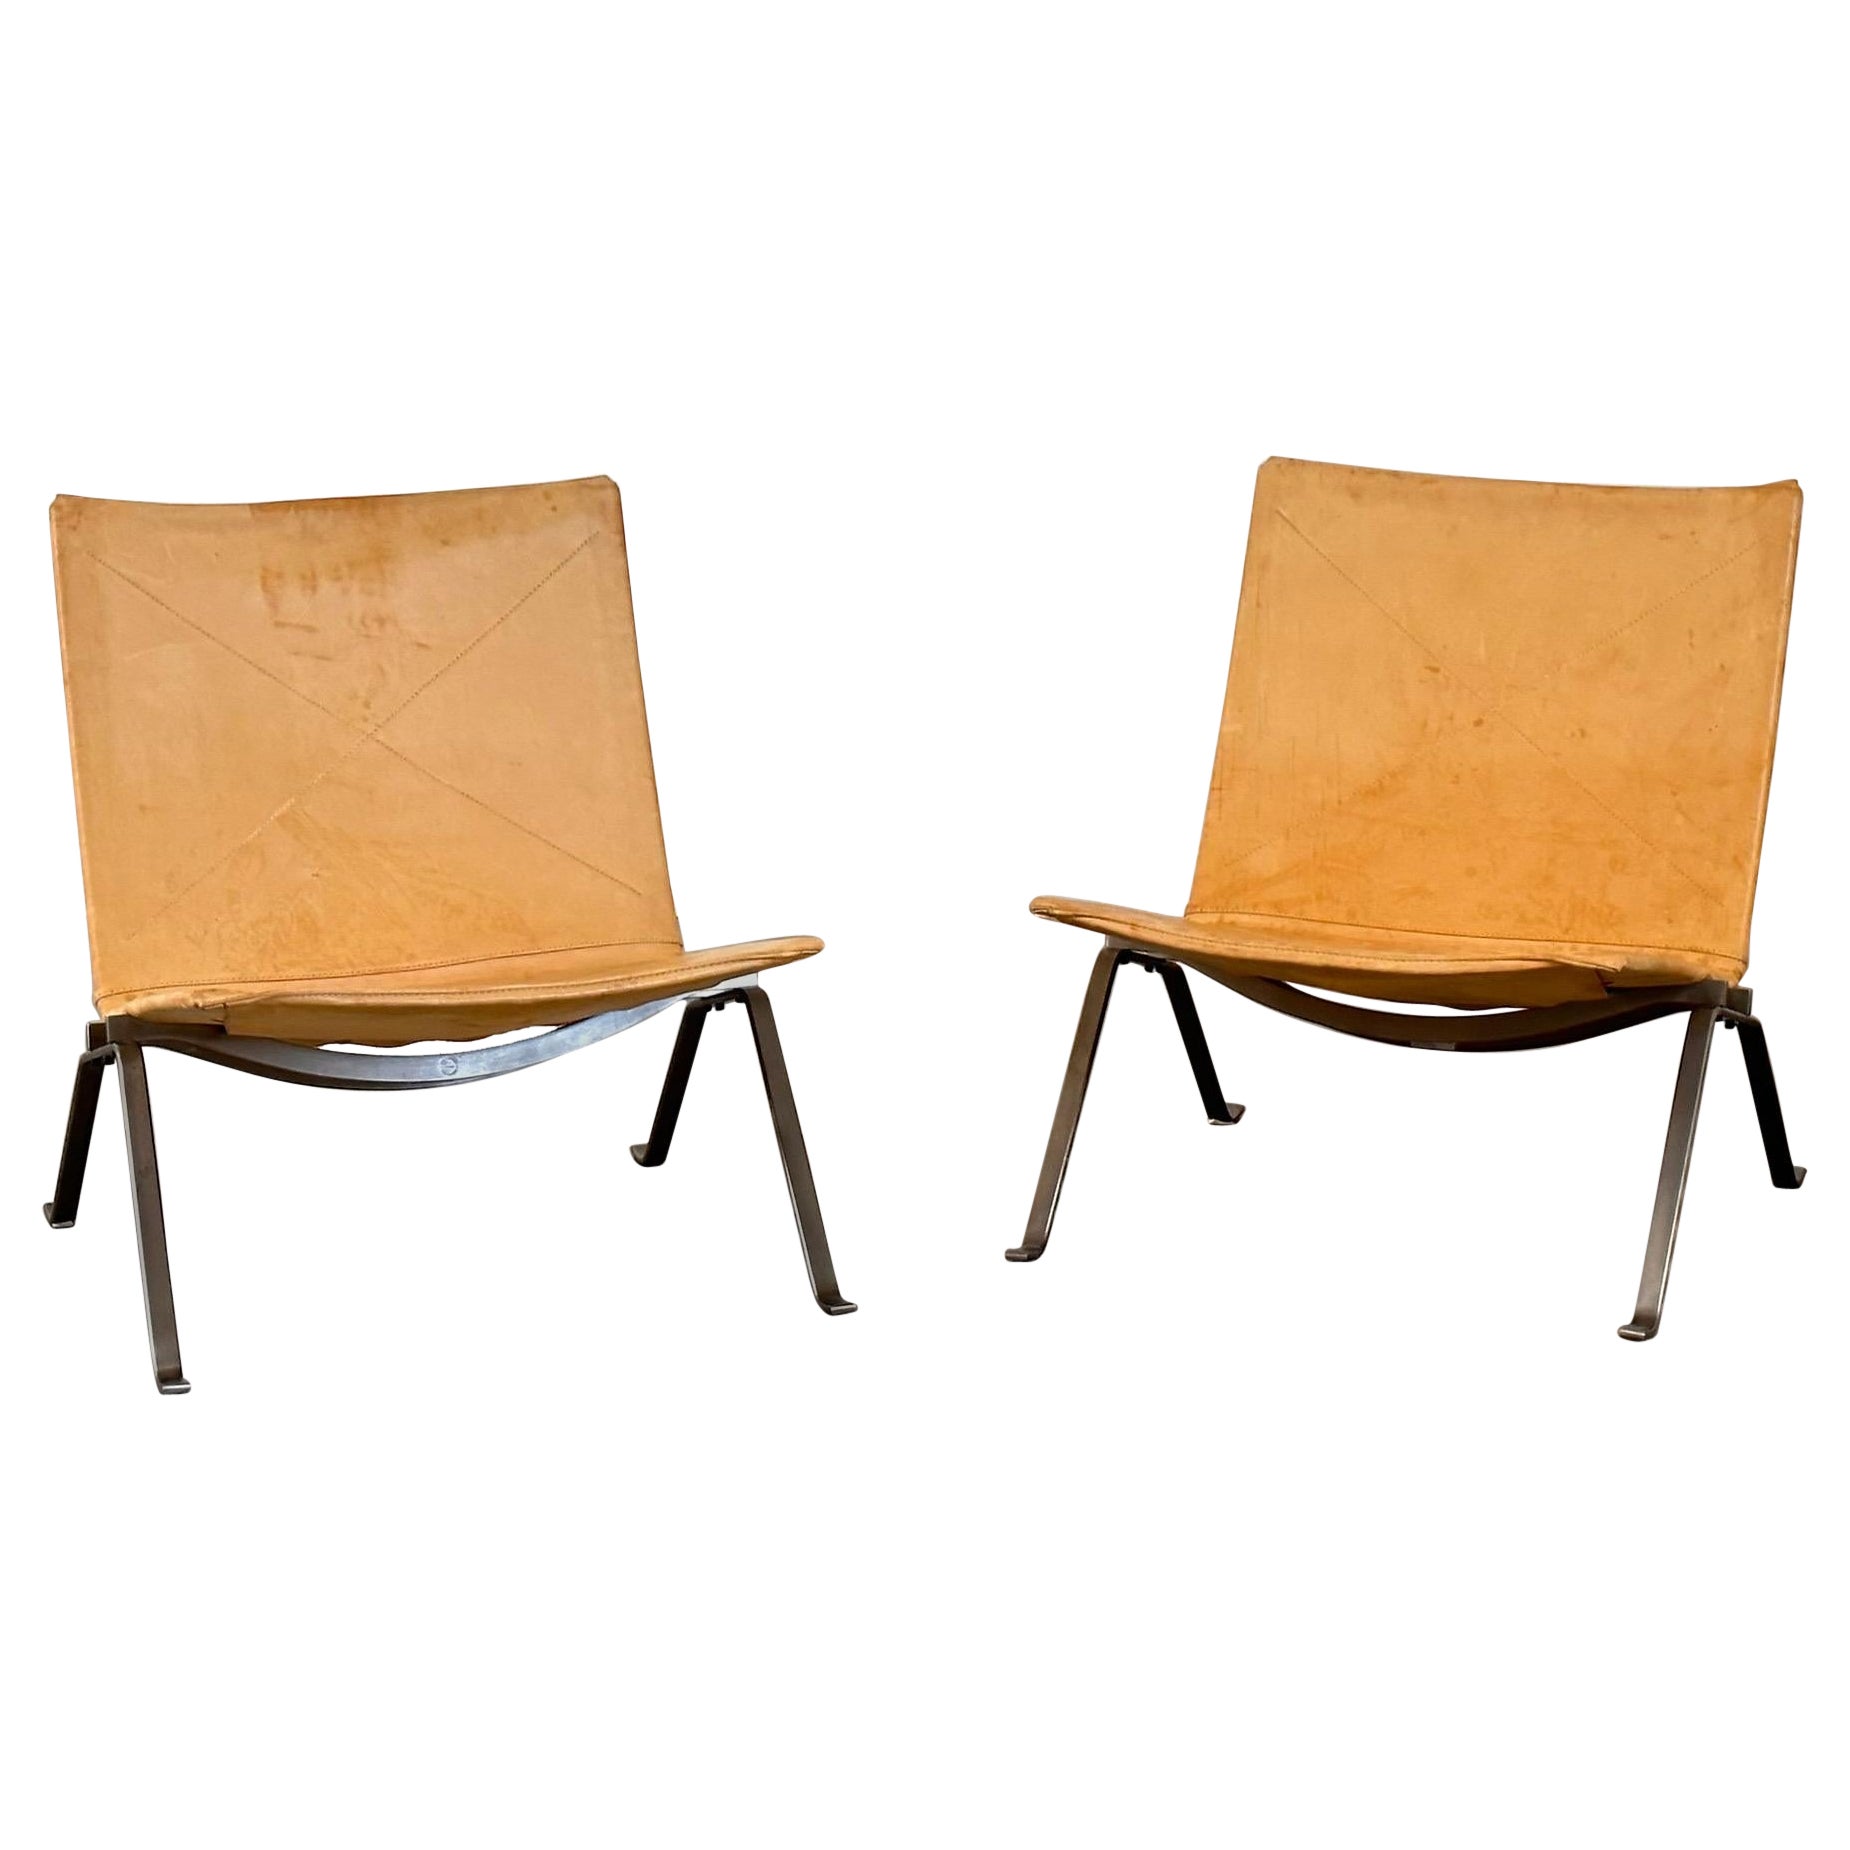 Poul Kjaerholm "PK22" Lounge Chairs for Fritz Hansen in Cognac Leather, 1956 For Sale